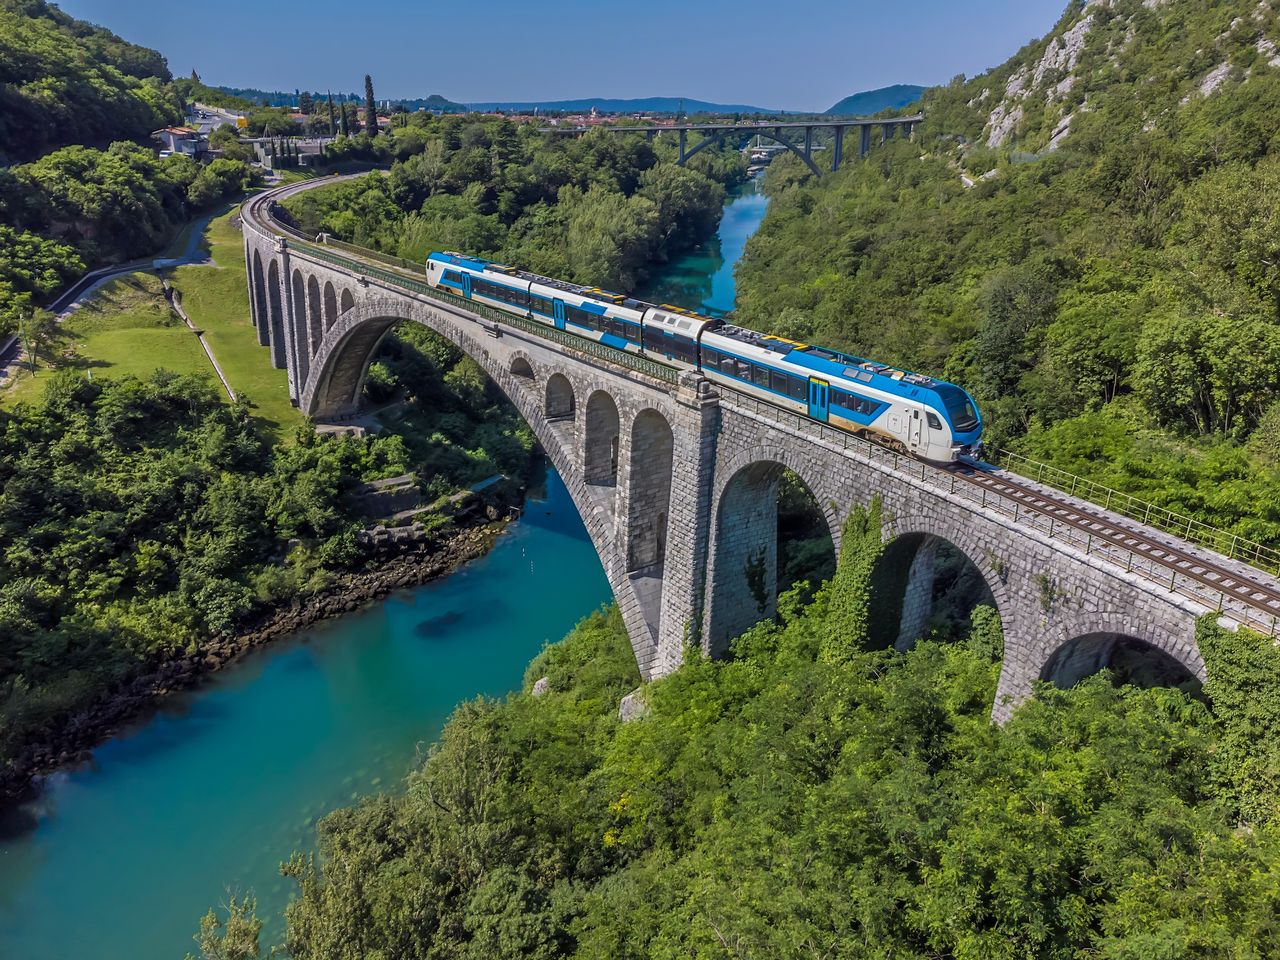 Crossing borders: Visit three European countries in two hours by train